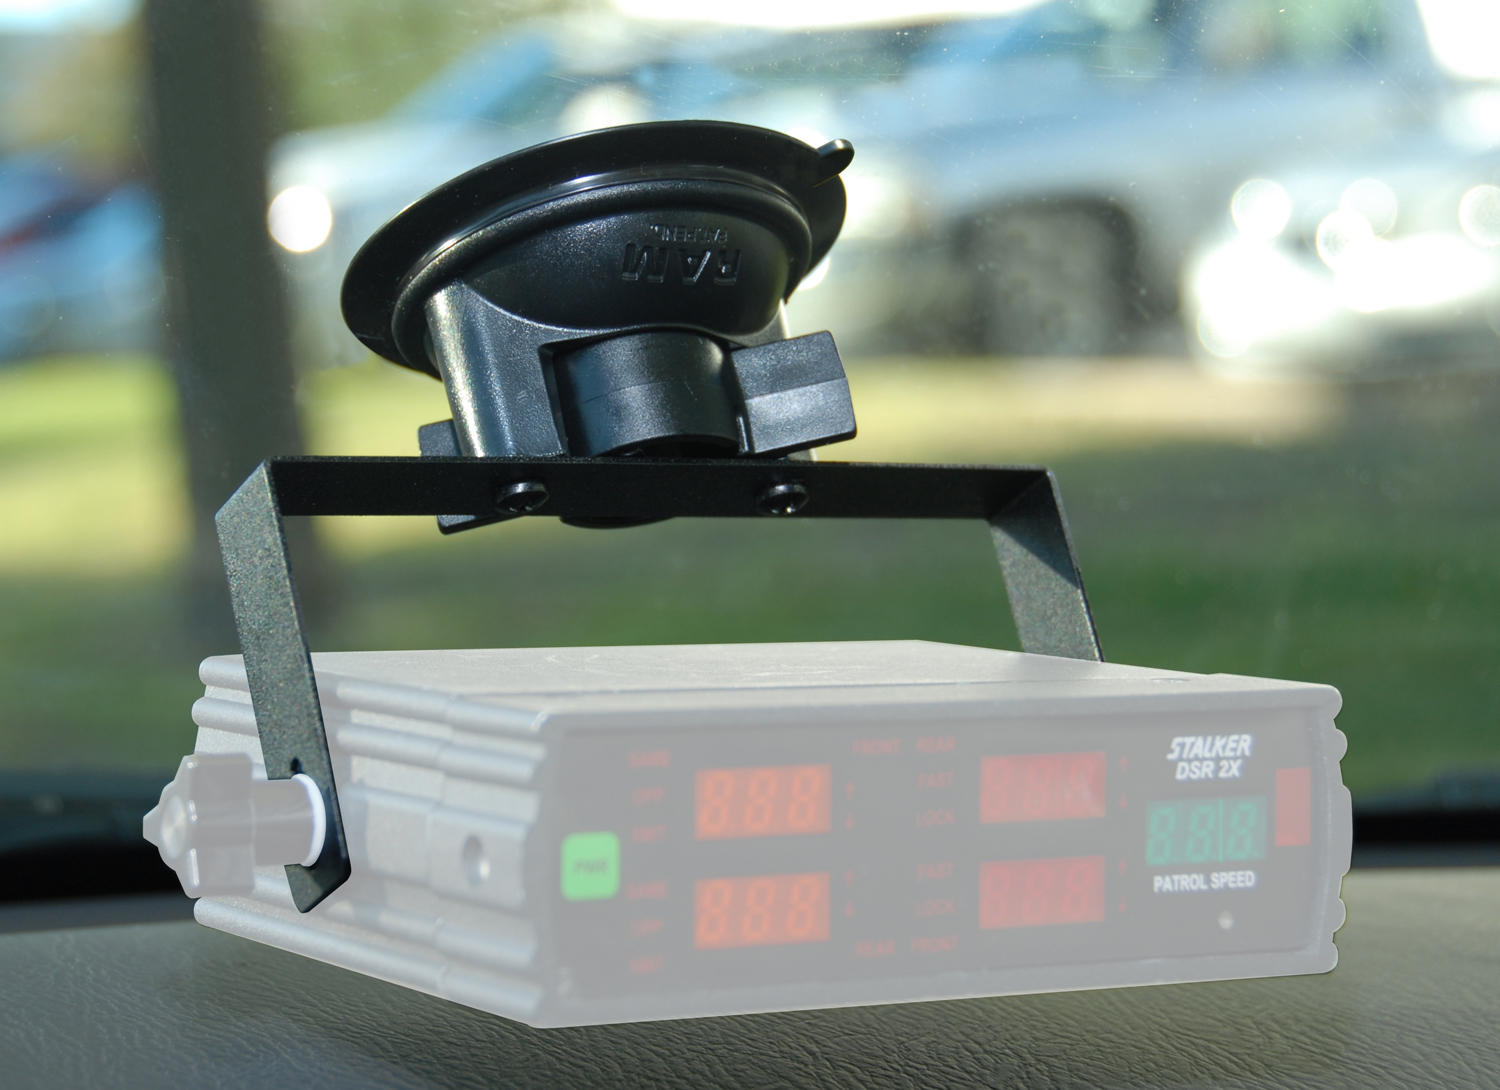 Stalker Radar Introduces New Suction Cup Mounts for Police Radars